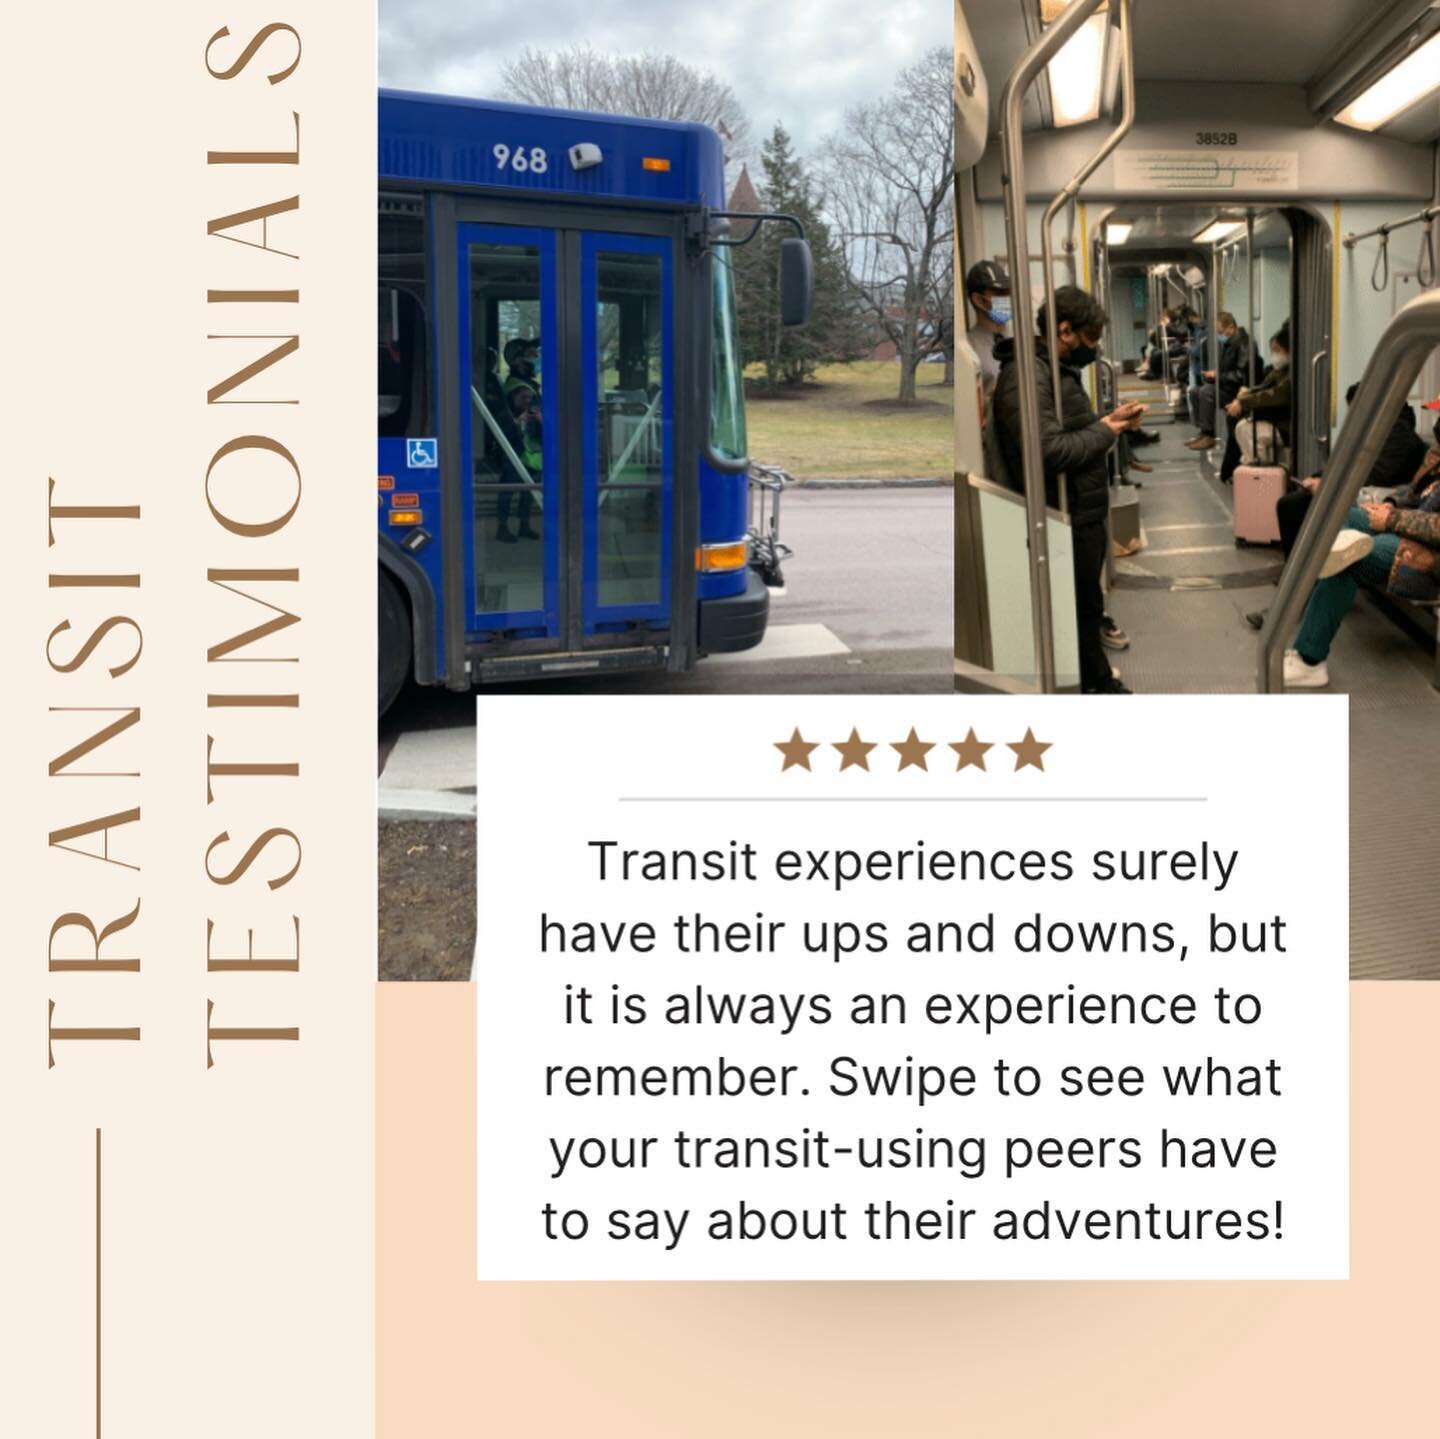 Check out these transit testimonials from the STVT interns. Transit adventure stories are just part of the journey, and we know the spectrum well! Share your own memorable transit experiences in the comments below ⬇️⬇️⬇️